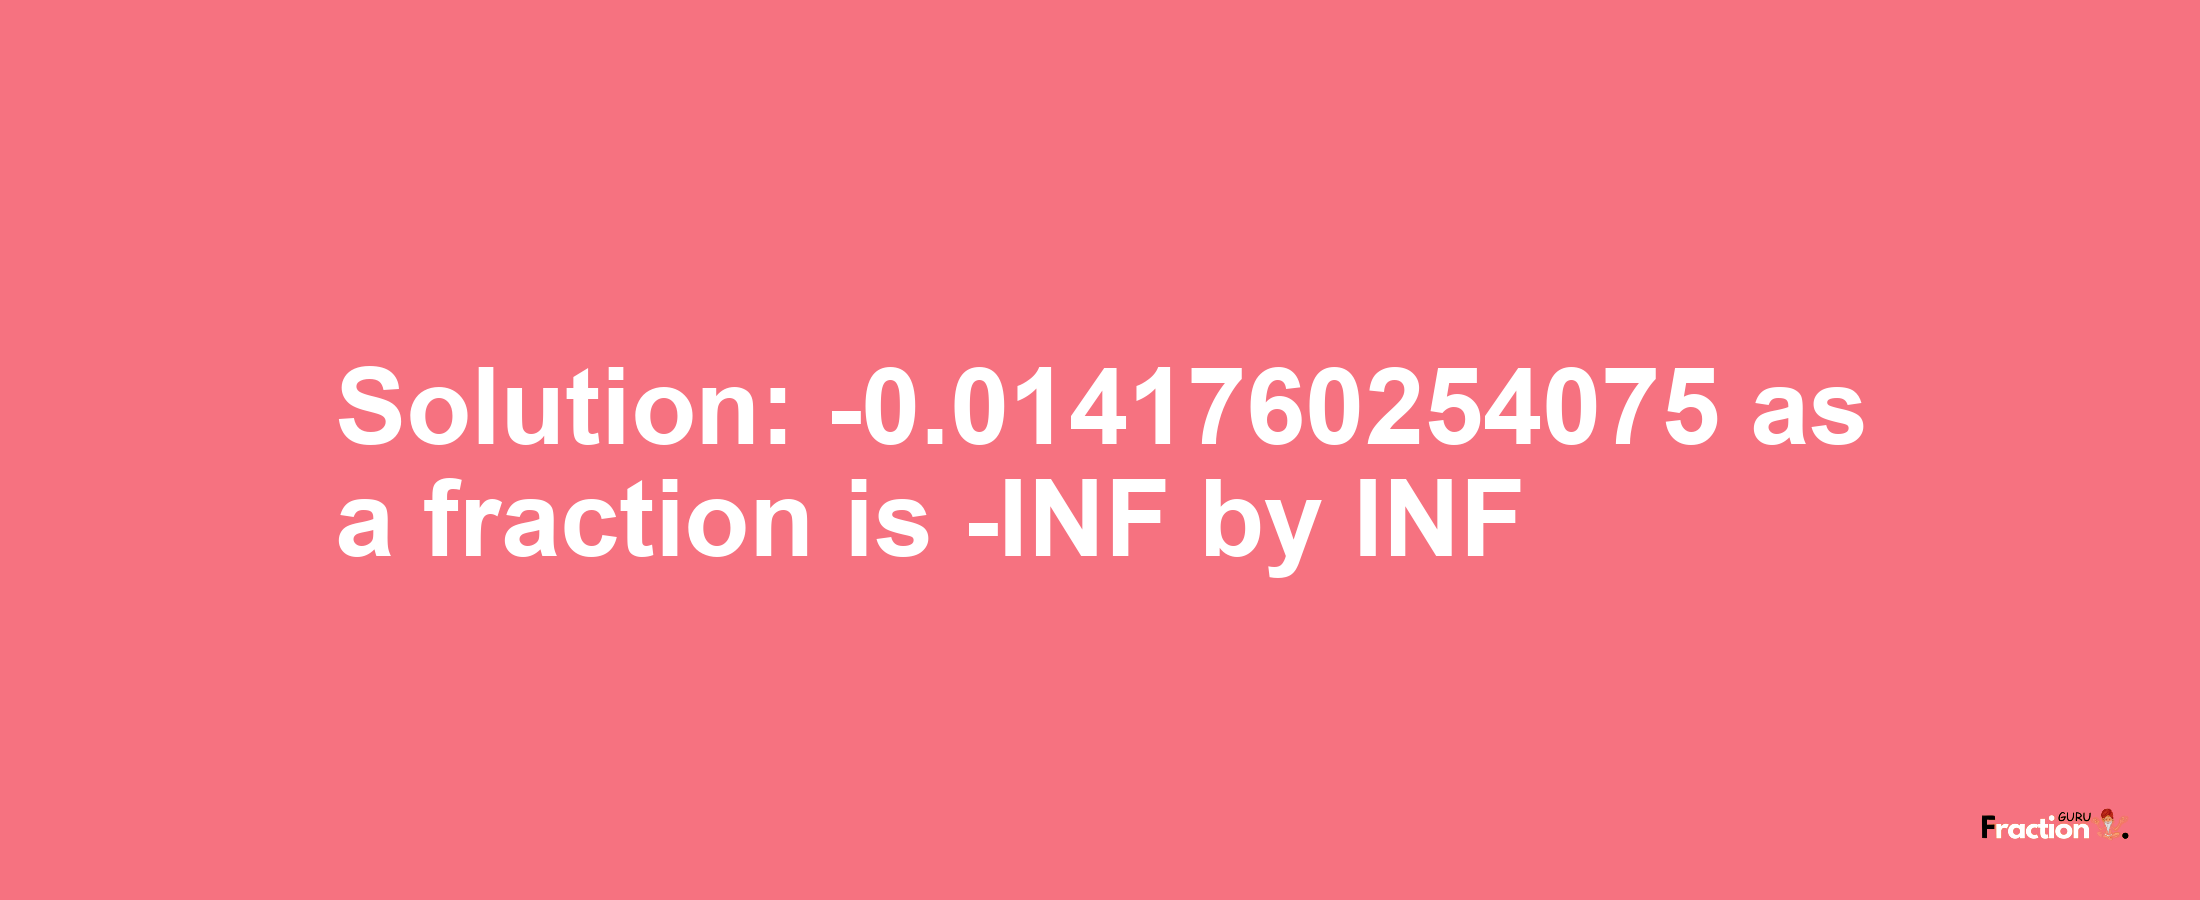 Solution:-0.0141760254075 as a fraction is -INF/INF